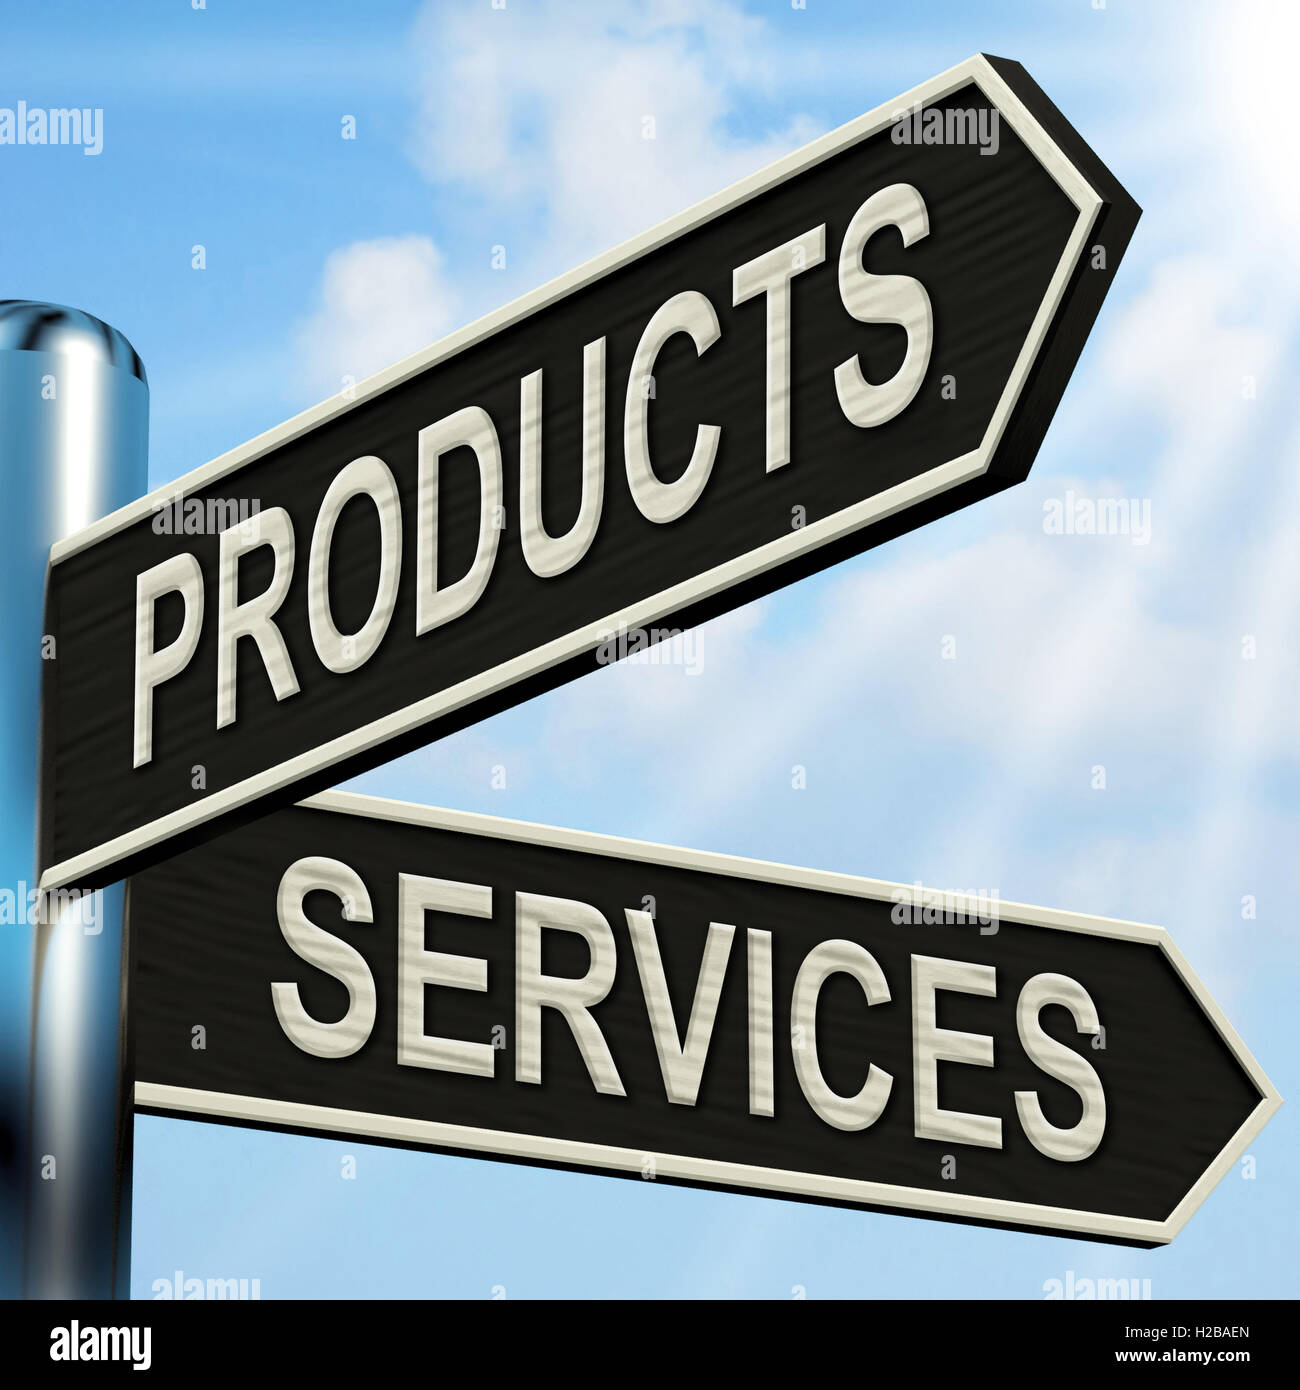 Products Services Signpost Shows Business Merchandise And Servic Stock Photo